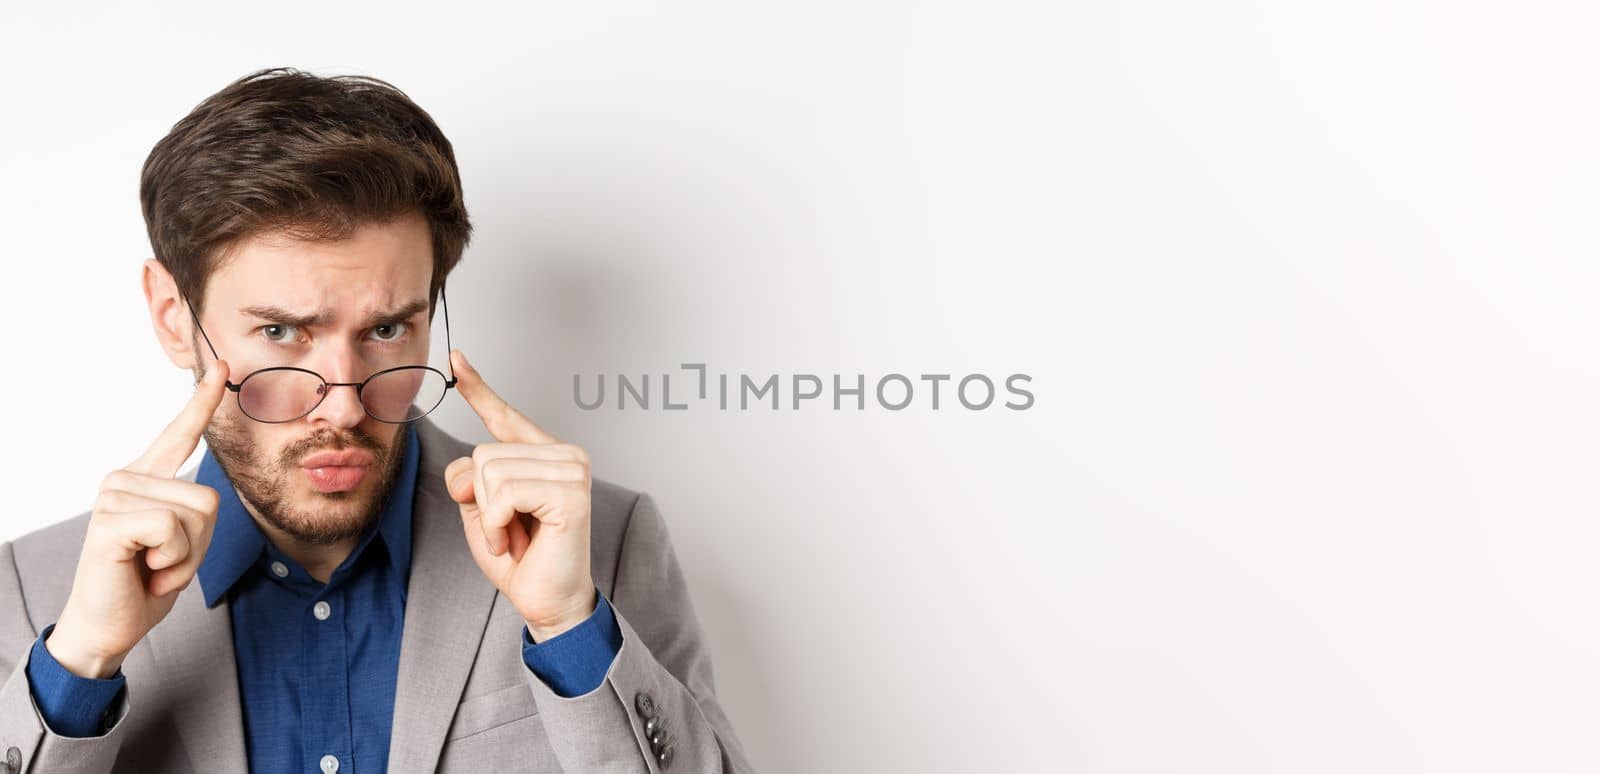 Close-up portrait of suspicious man in suit, taking-off glasses and frowning with hesitant face, standing on white background.